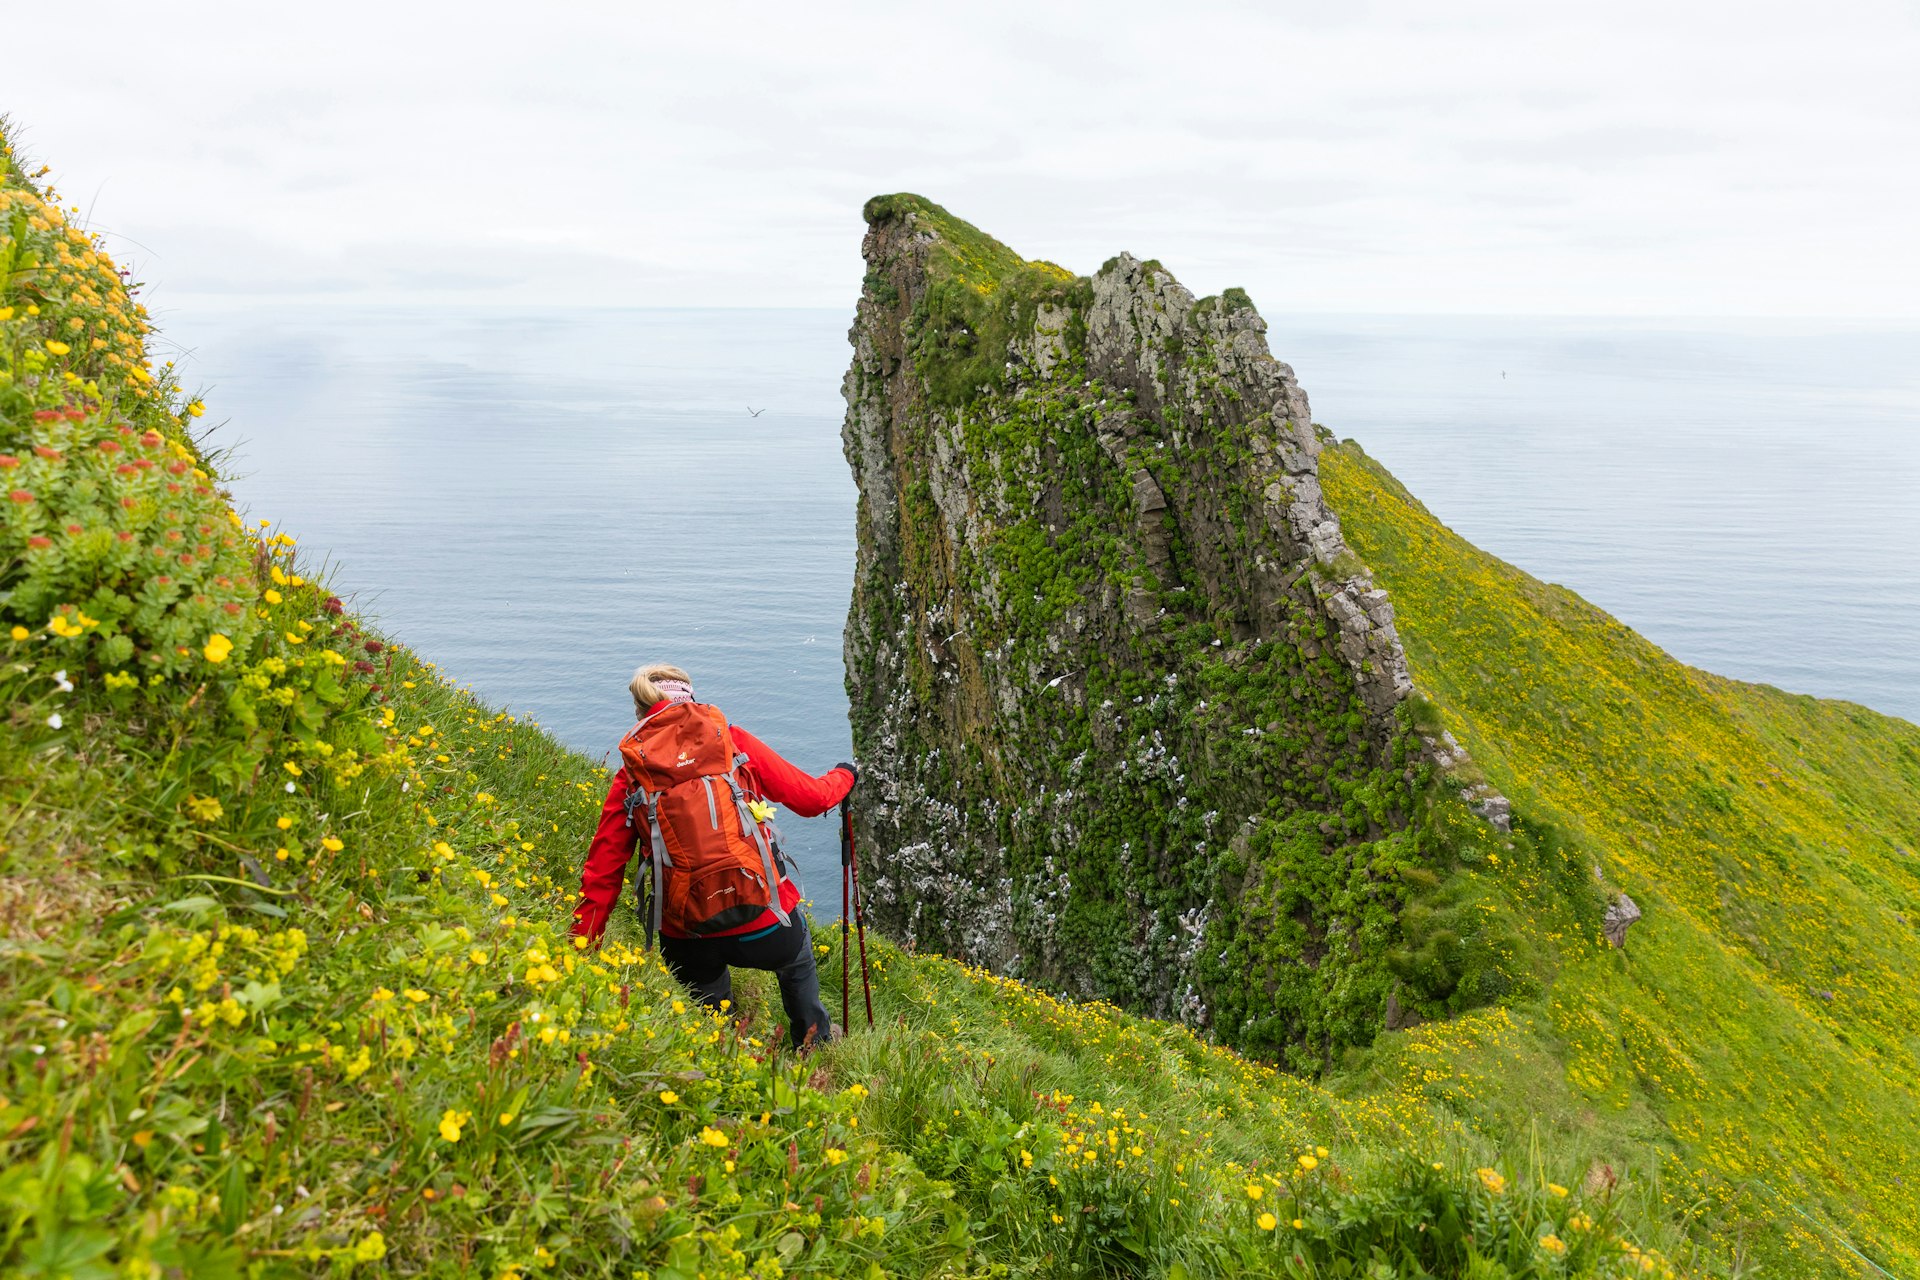 A woman hiking on a steep cliff with the ocean in the background